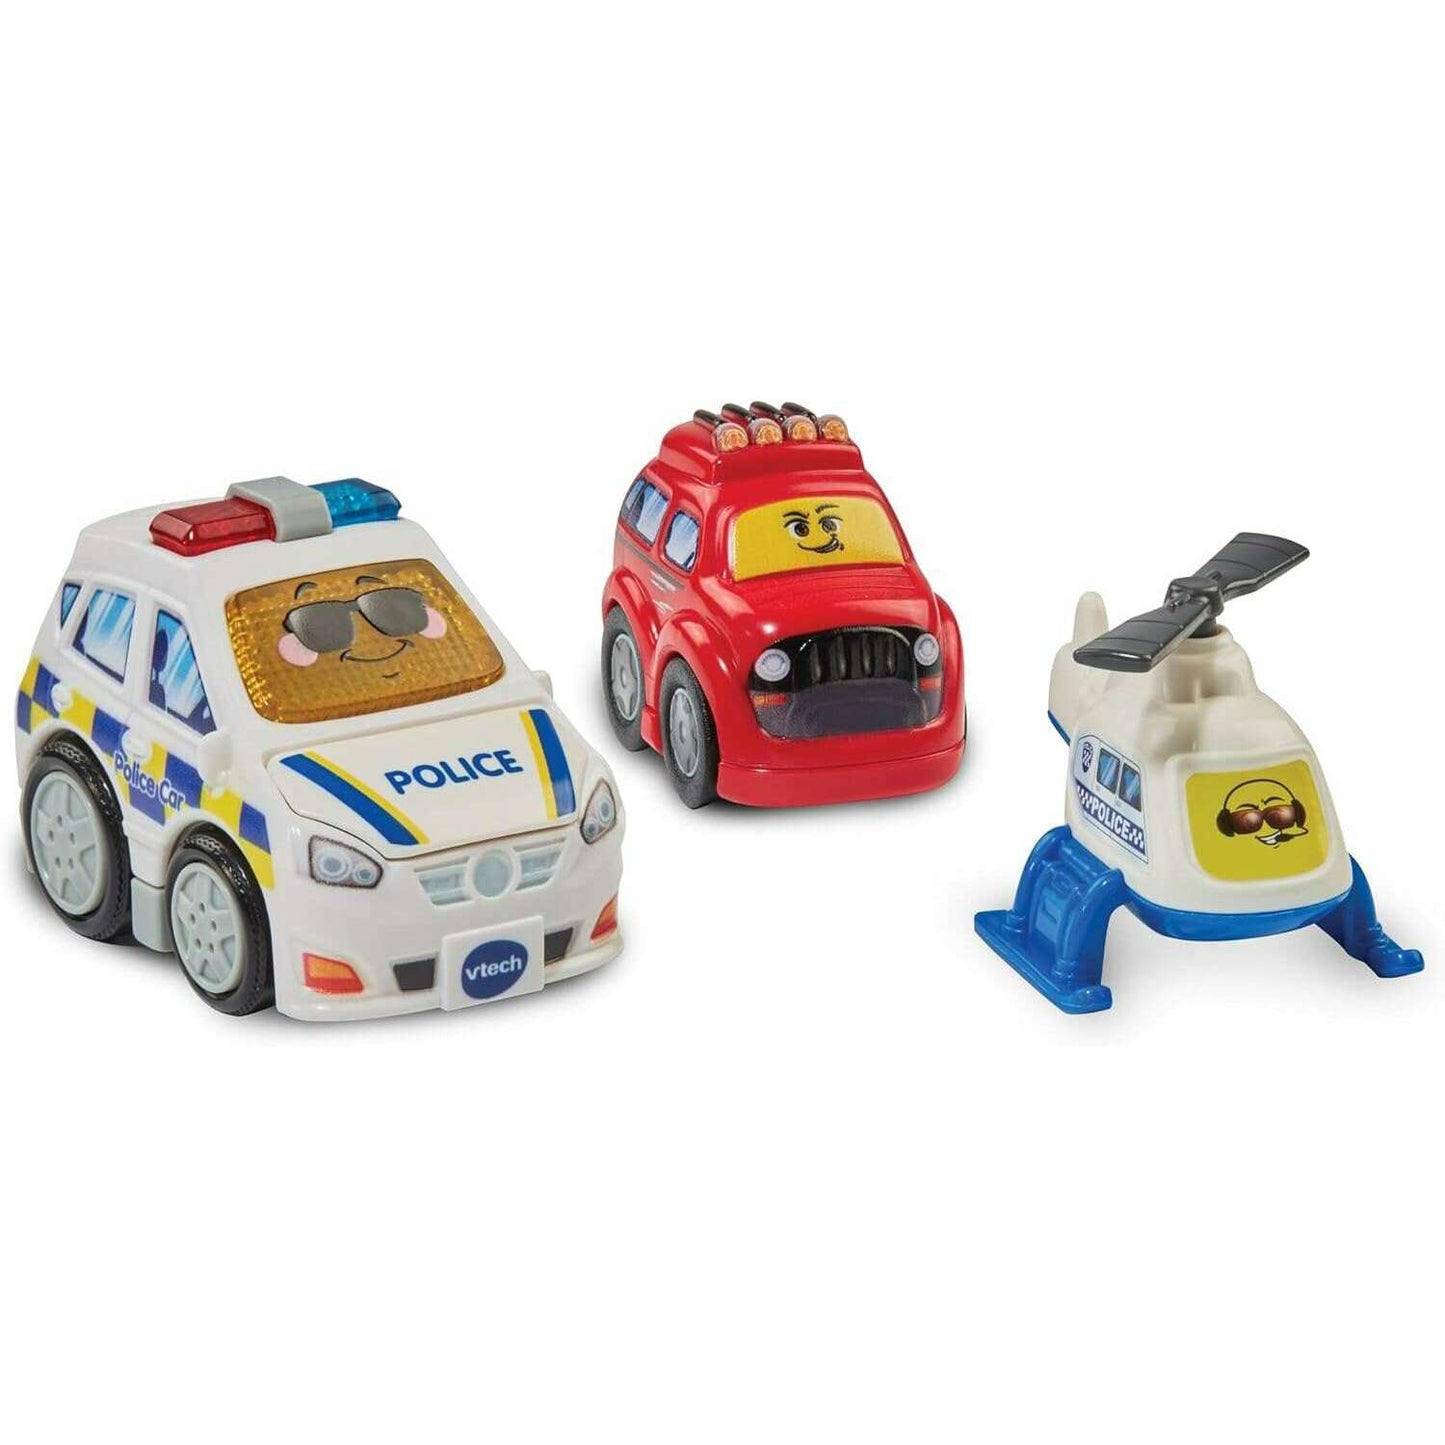 Toys N Tuck:Vtech Toot-Toot Drivers Police Station,Vtech